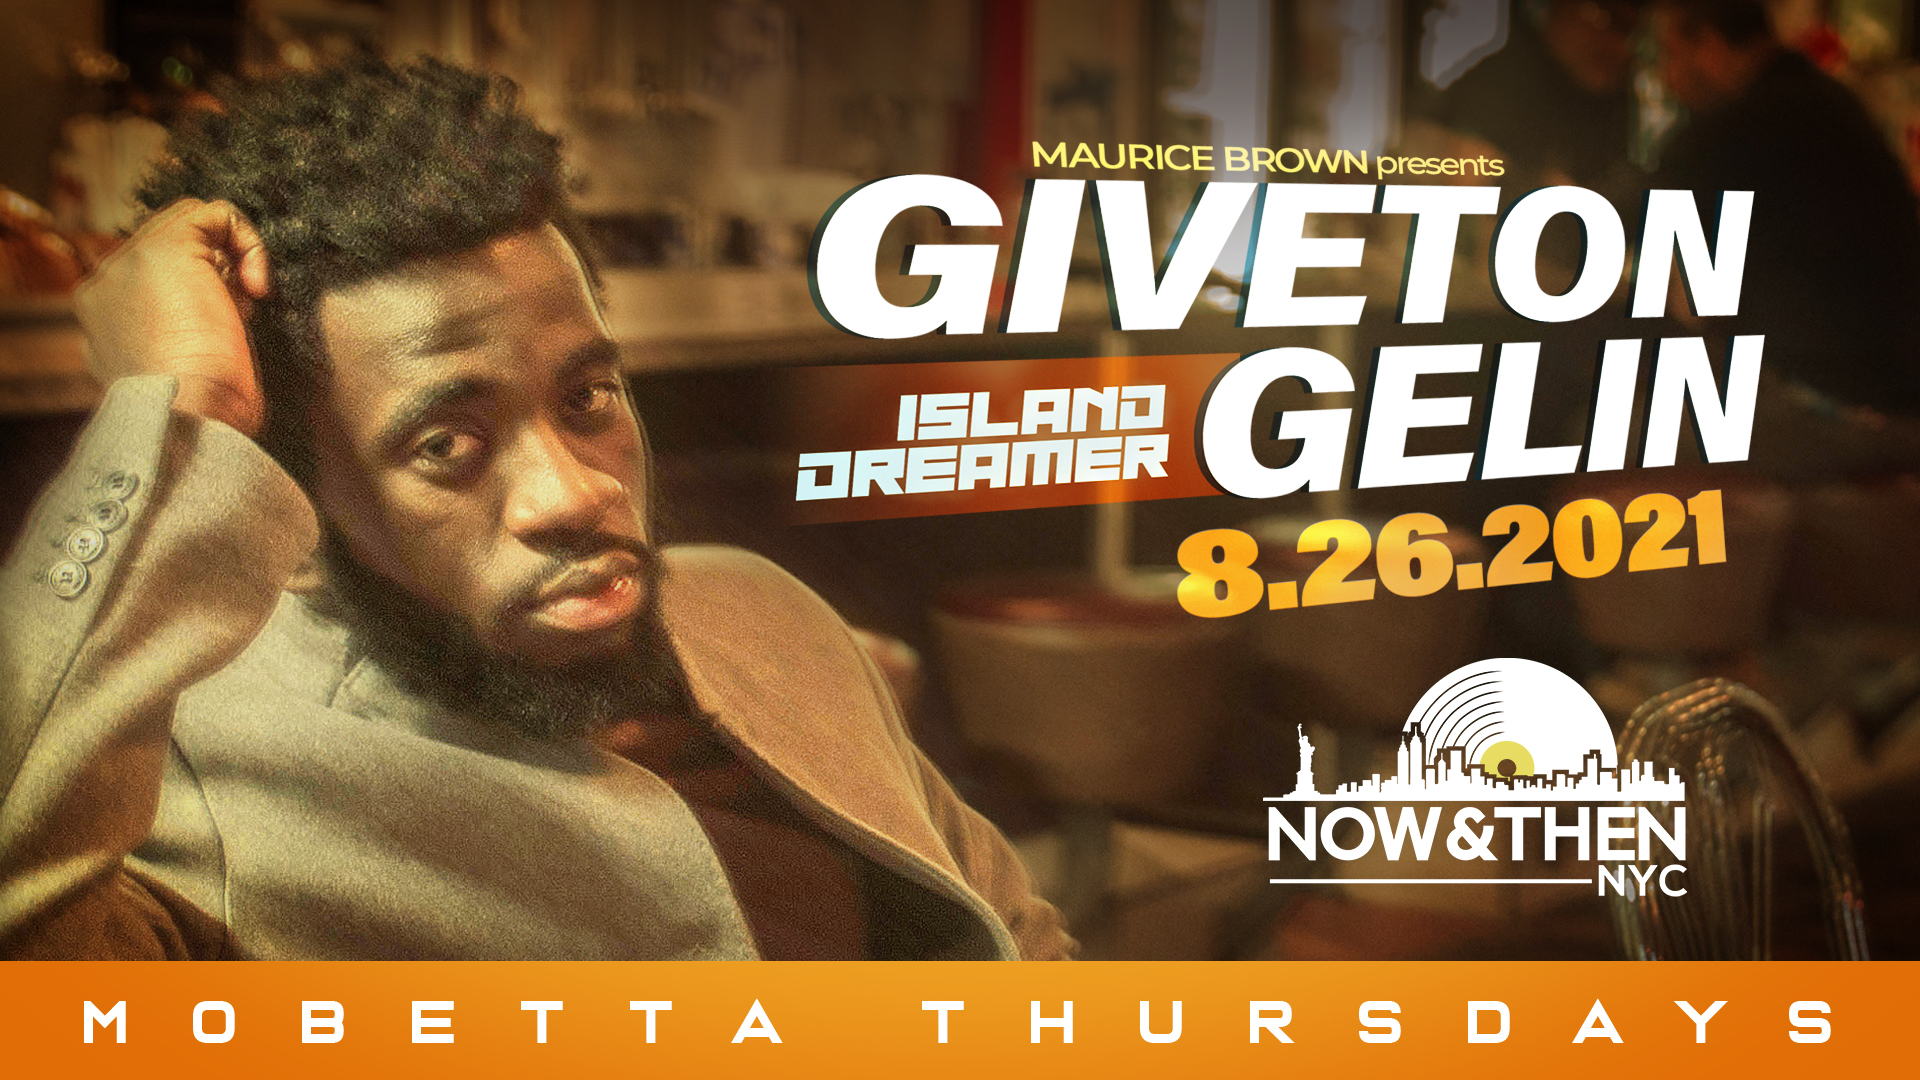 Photo for Mobetta Thursdays Curated By Maurice Brown Presents: Giveton Gelin  August 26th on ViewStub